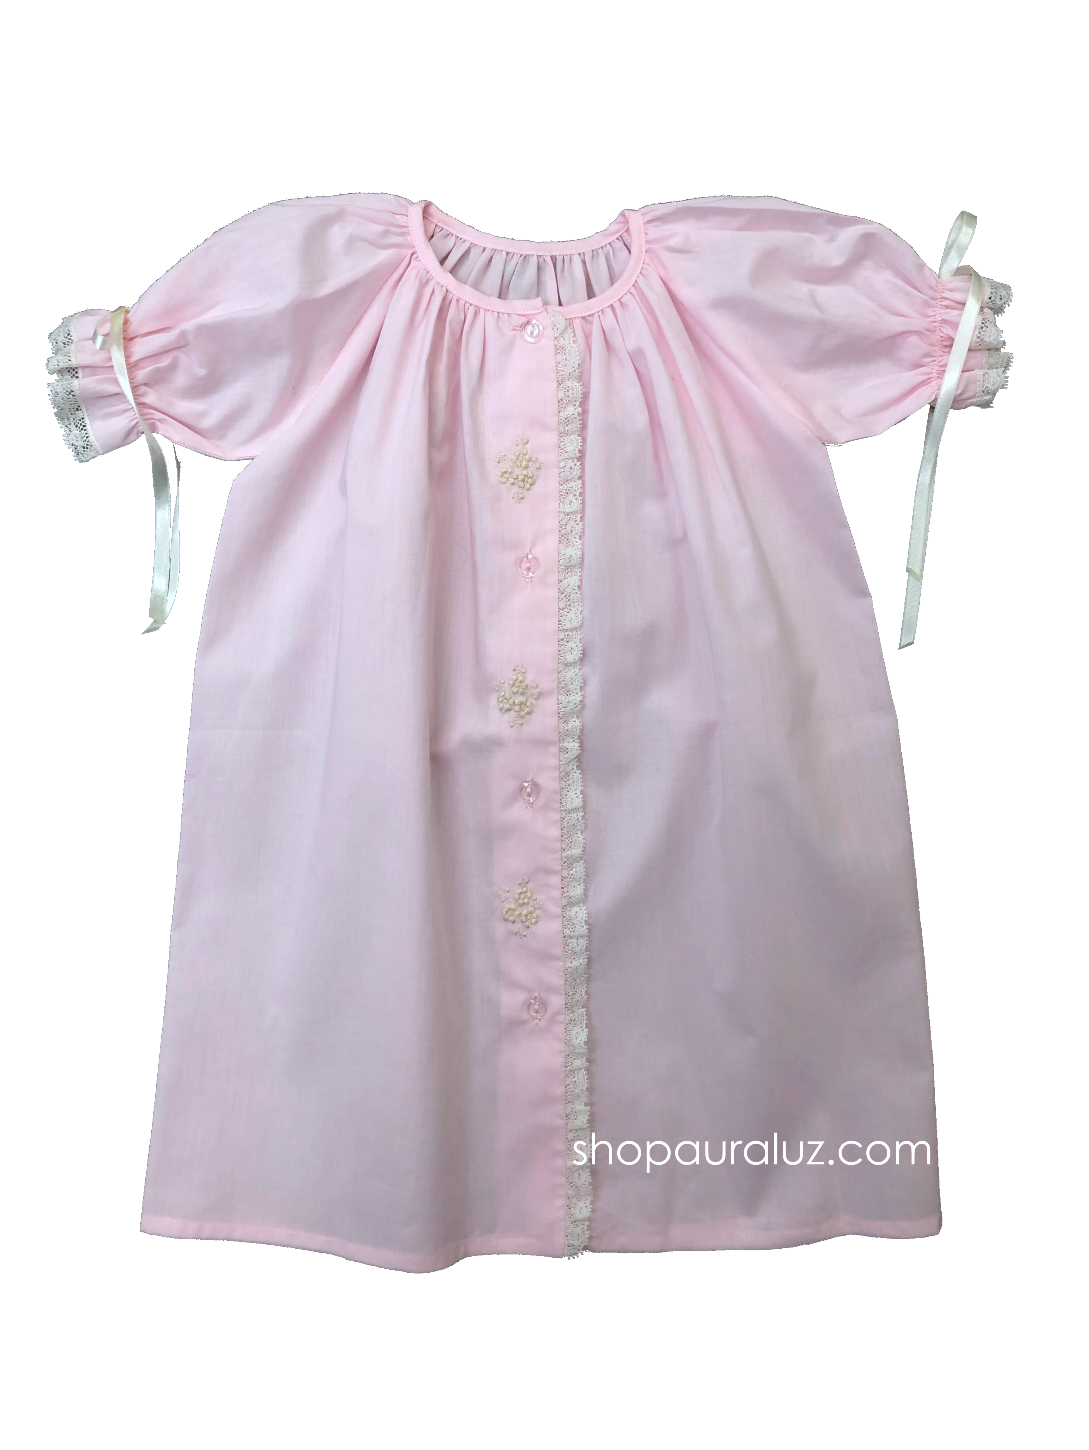 Auraluz Day Gown l/s..Pink with ecru lace, ribbons and embroidered flowers